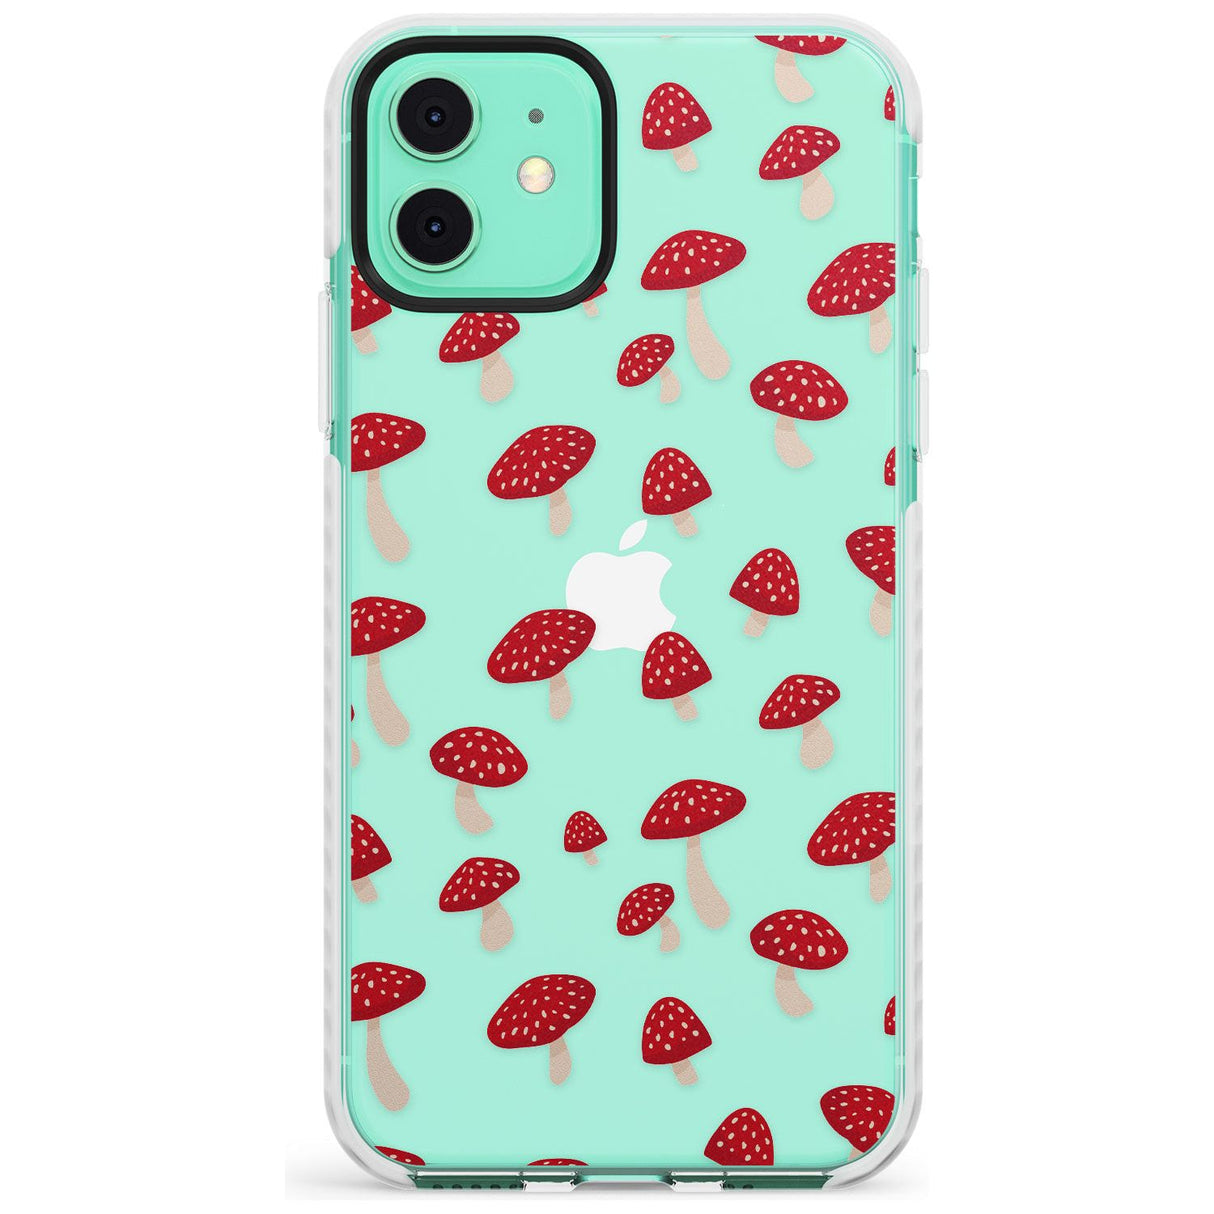 Magical Mushrooms Pattern Impact Phone Case for iPhone 11